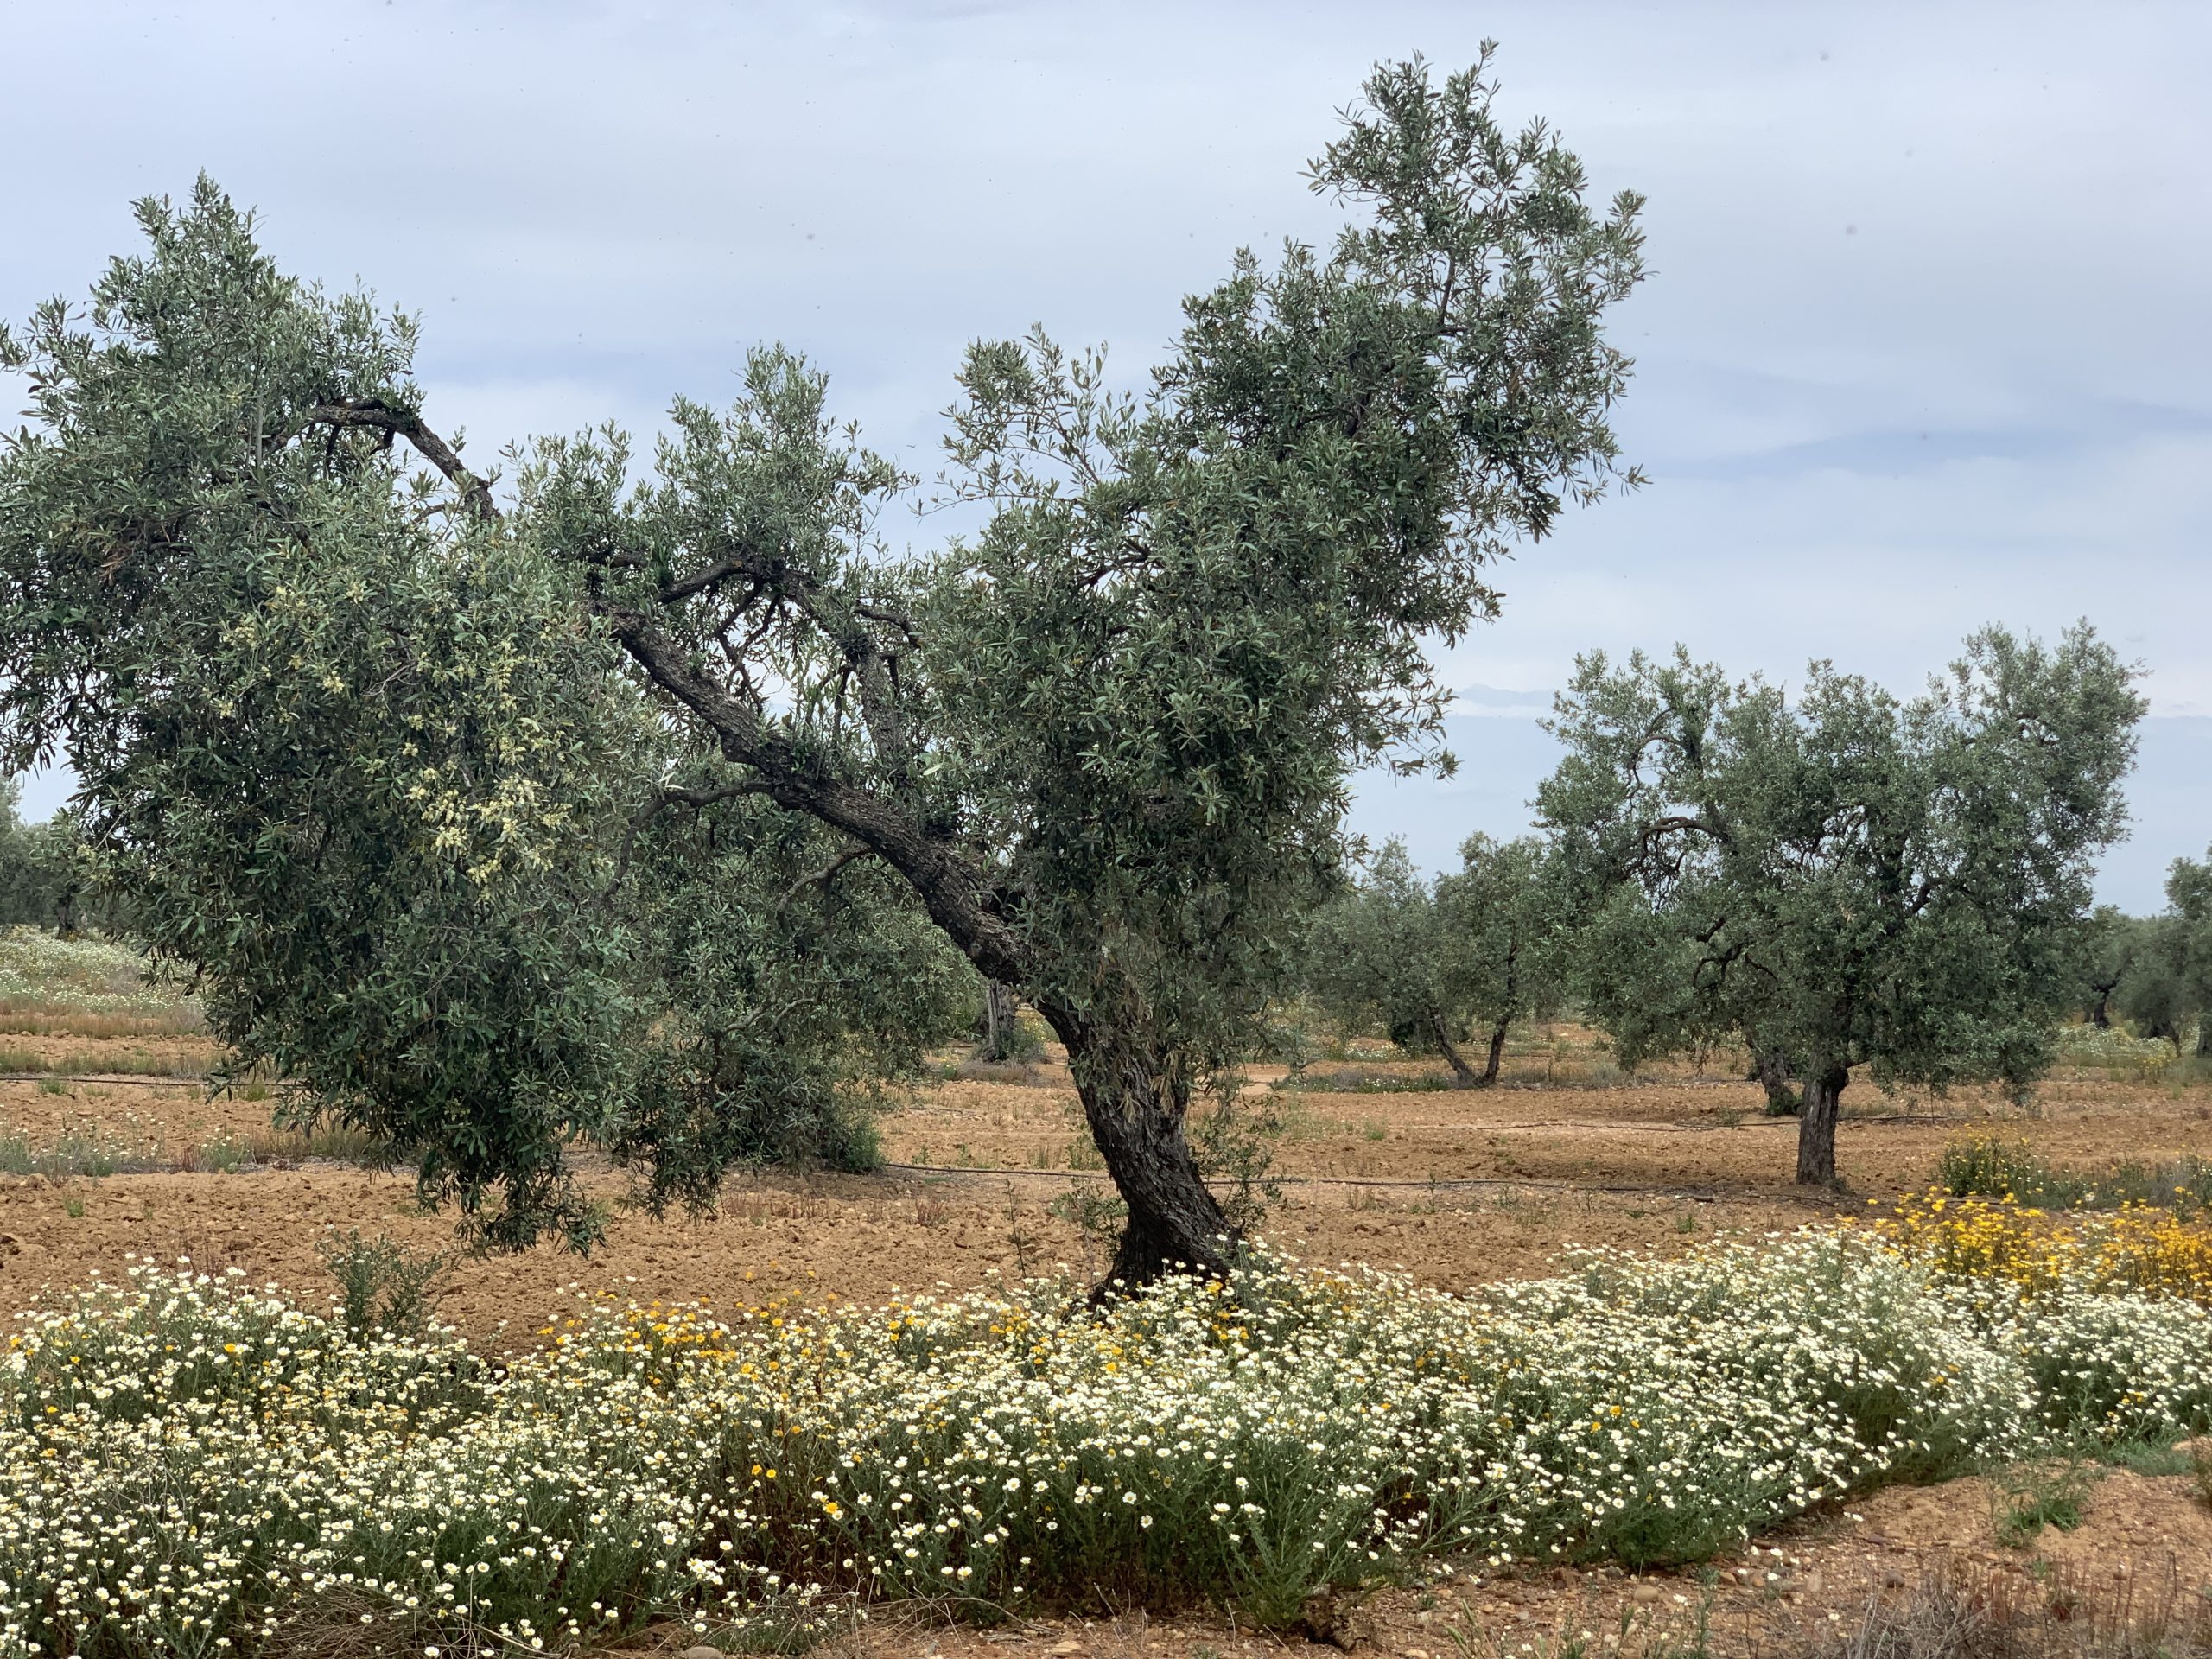 Plant cover in the cultivation of the olive tree